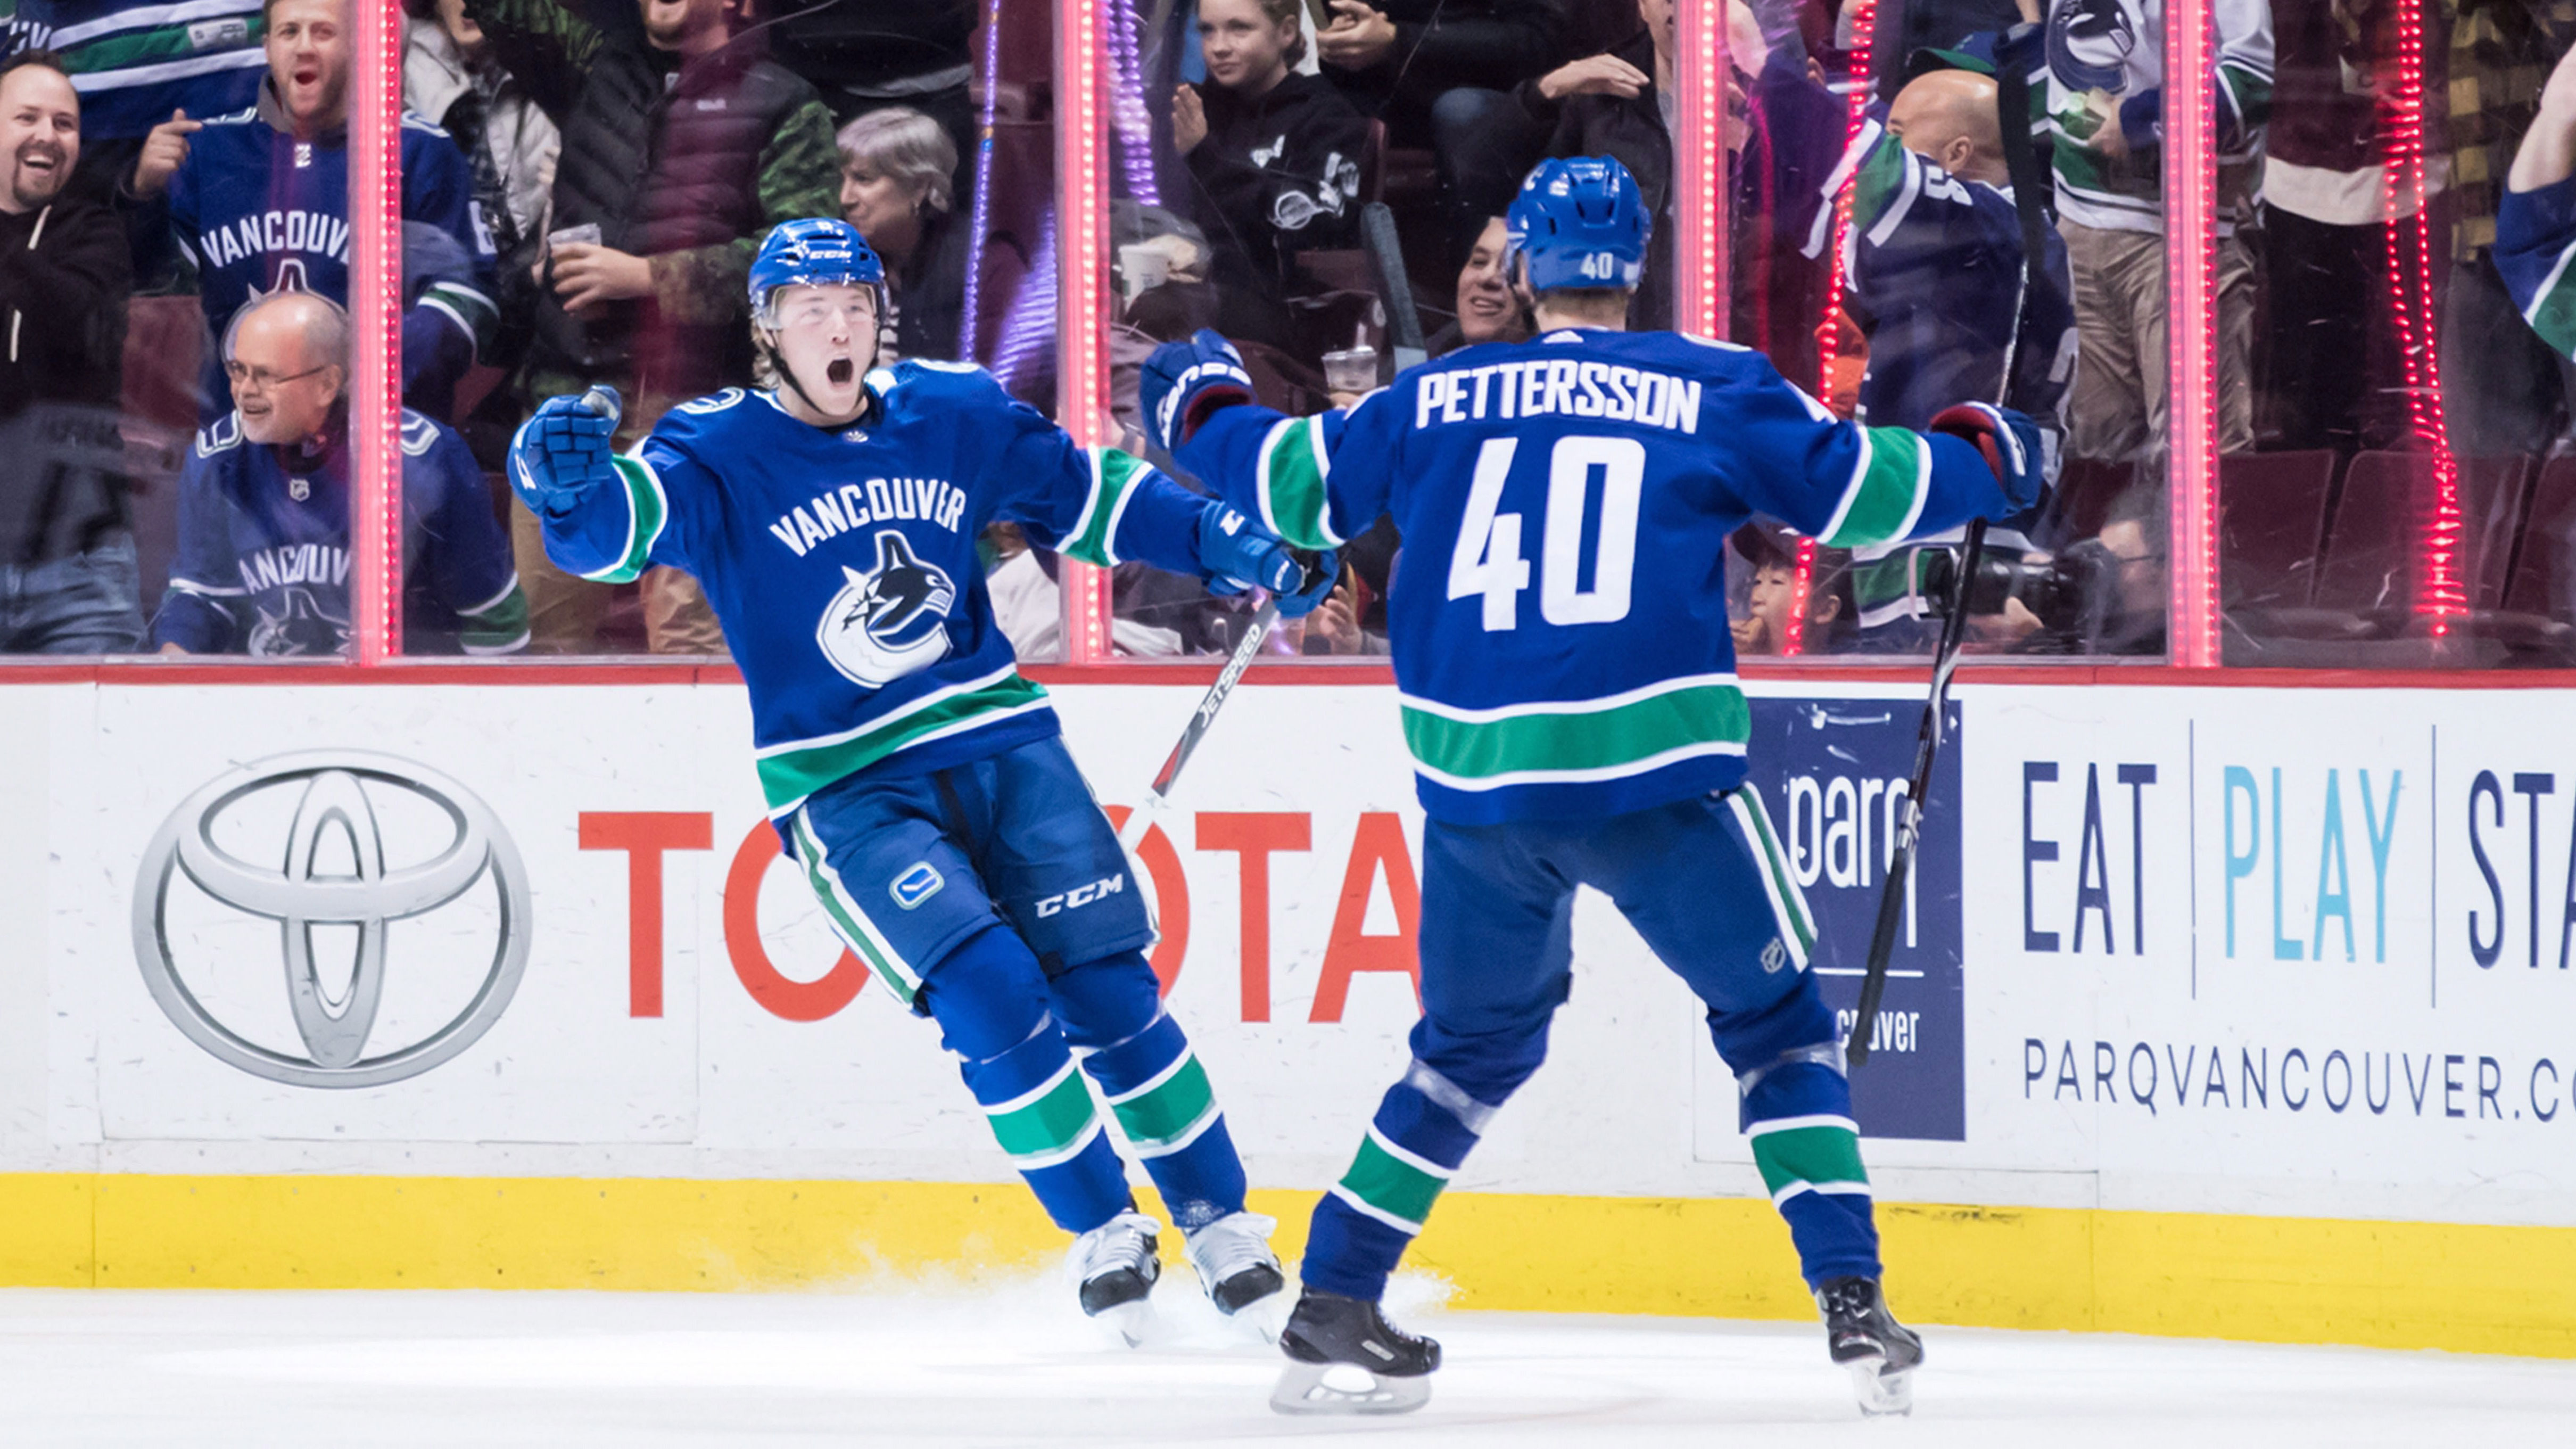 Pettersson's dominant night leads Canucks past Avalanche